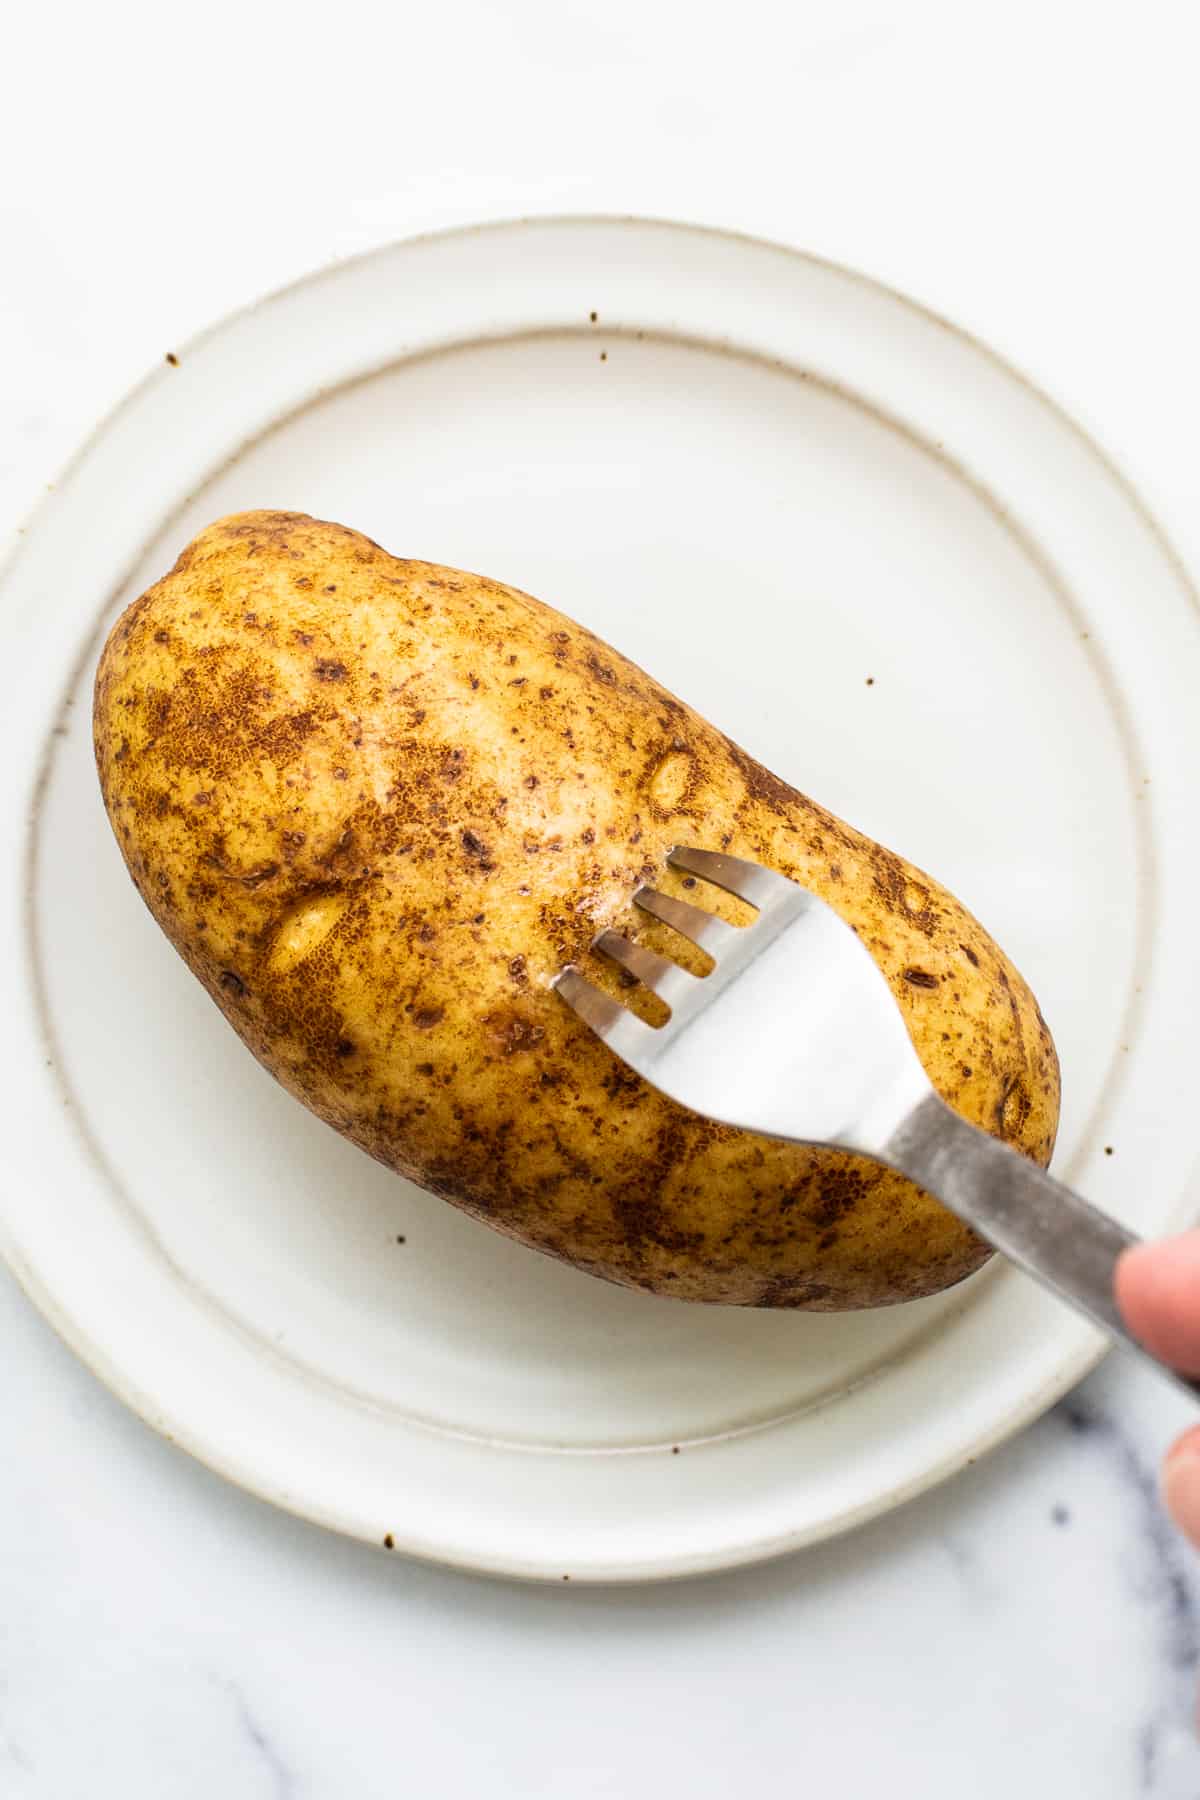 Poking holes in a potato with a fork.